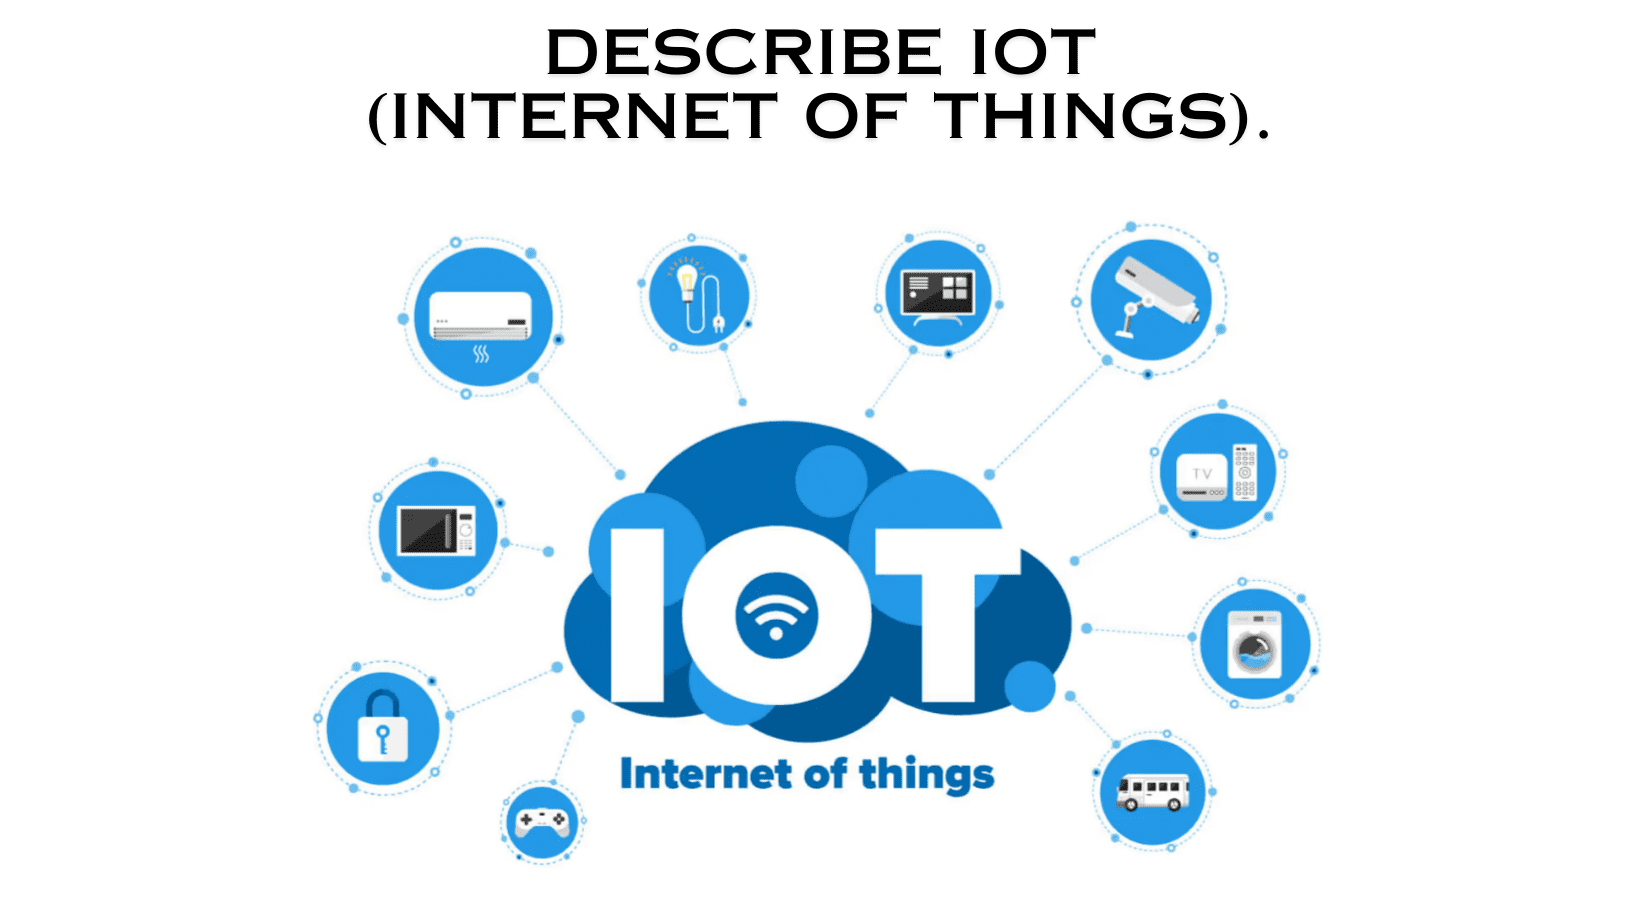 Describe IoT (Internet of things) details